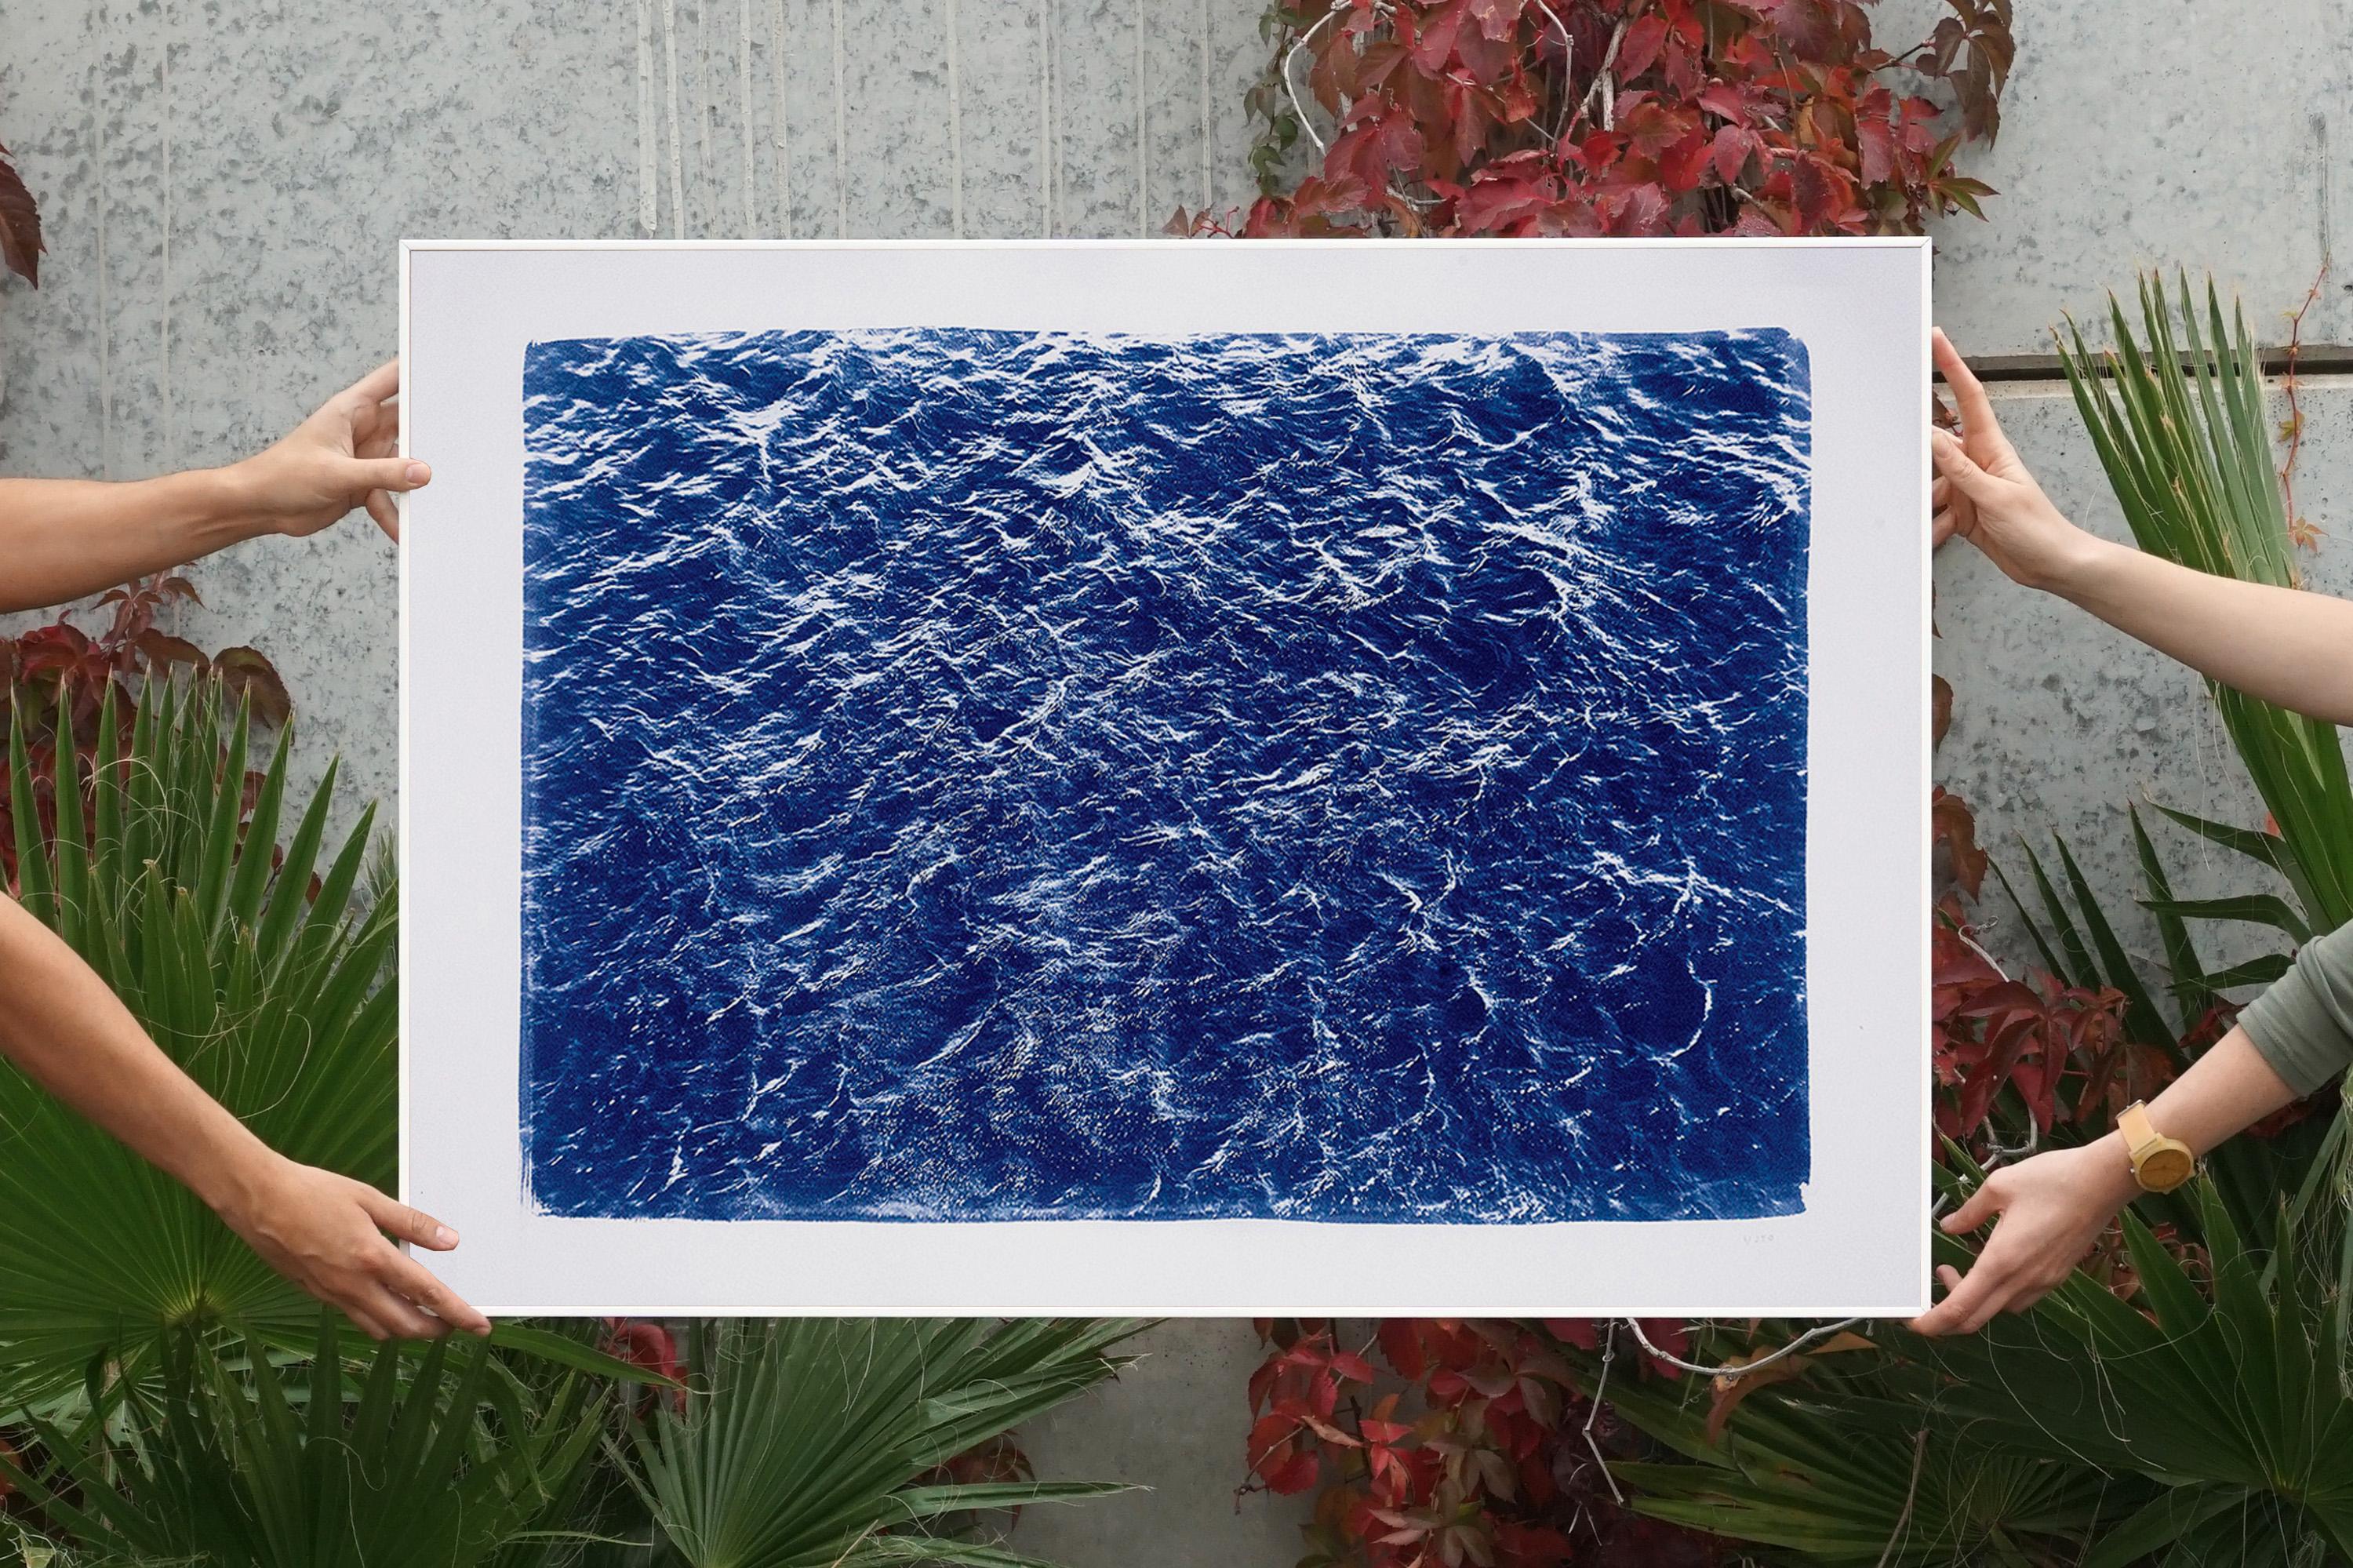 Pacific Ocean Currents, Cyanotype on Watercolor Paper, White Border, 100x70cm - Print by Kind of Cyan